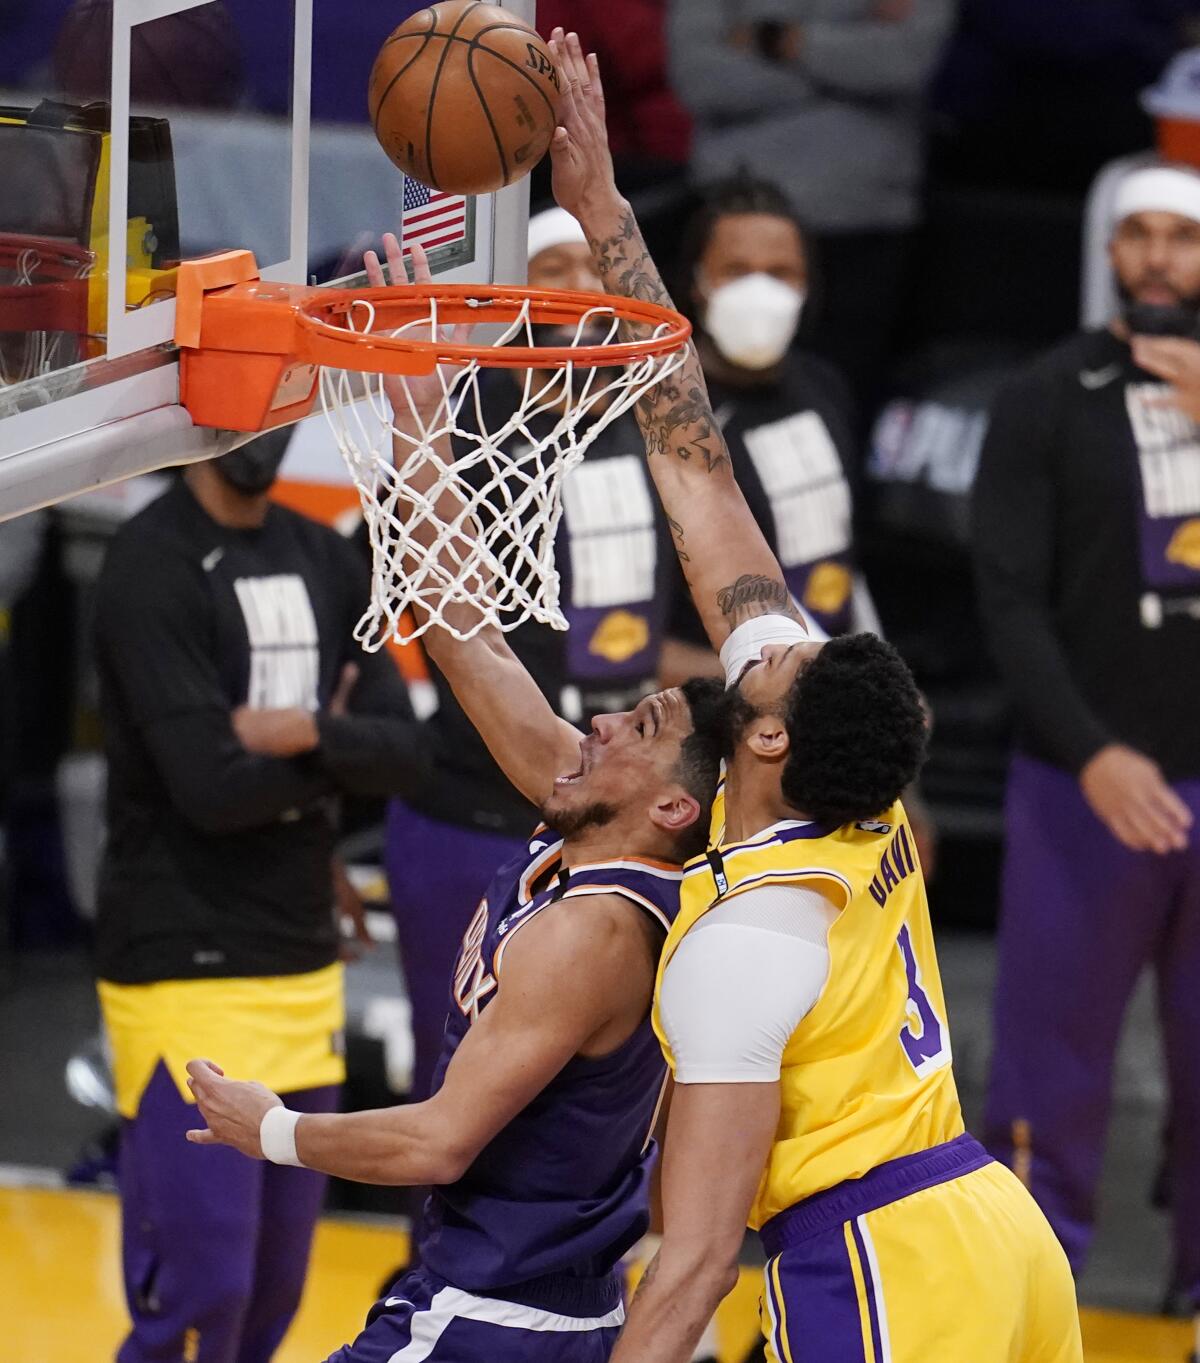 Lakers forward Anthony Davis blocks a shot by Suns guard Devin Booker during Game 3 on May 27, 2021, at Staples Center.